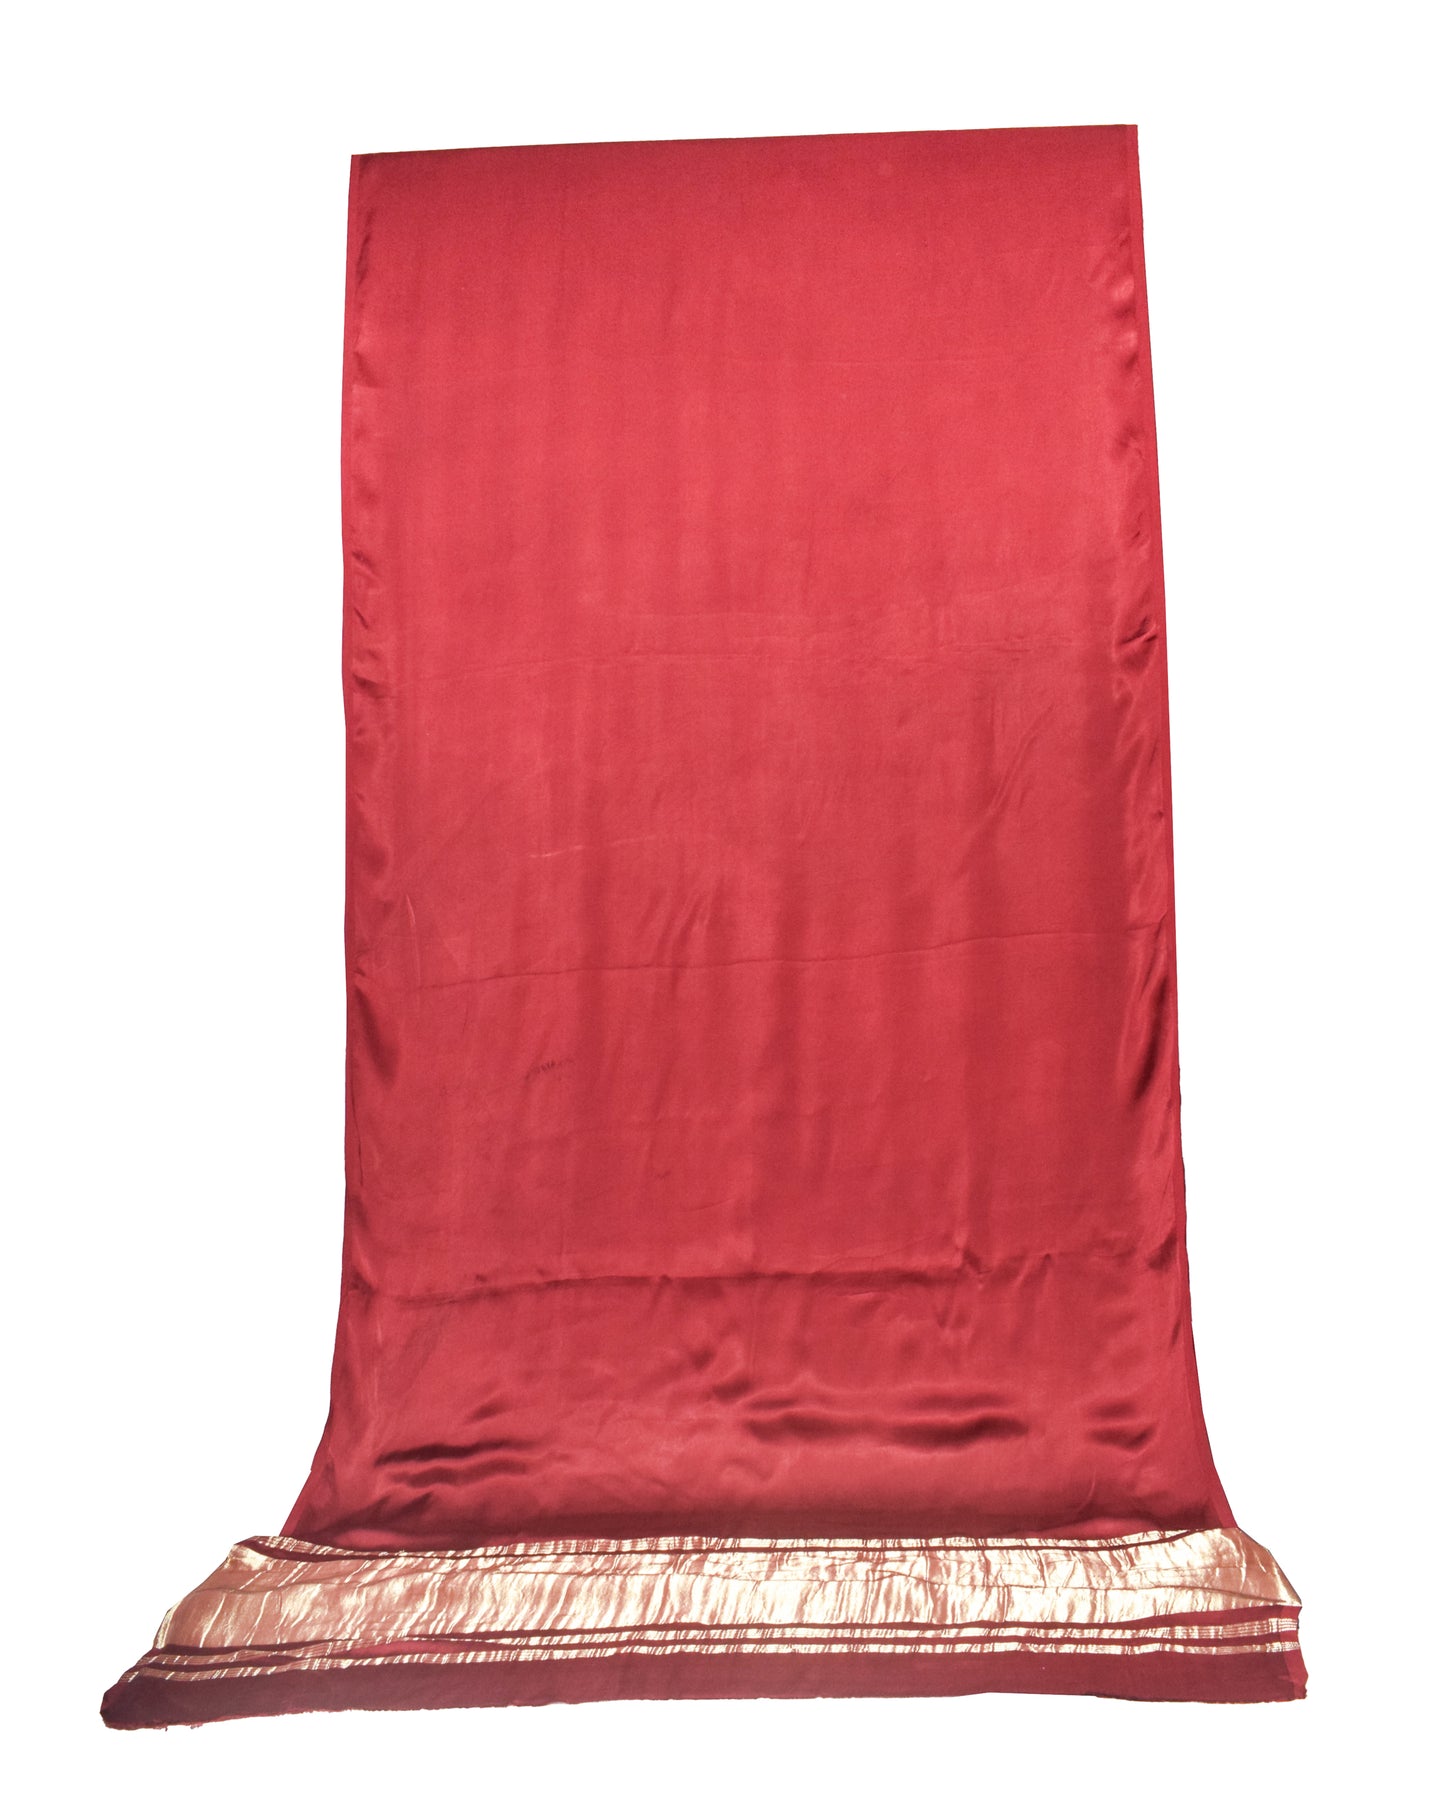 Plain Dyeing Modal Silk Plain Dyed Saree   with Golden Border  - With Blouse Piece - 6 Mtr Length    -  SKU : 0071